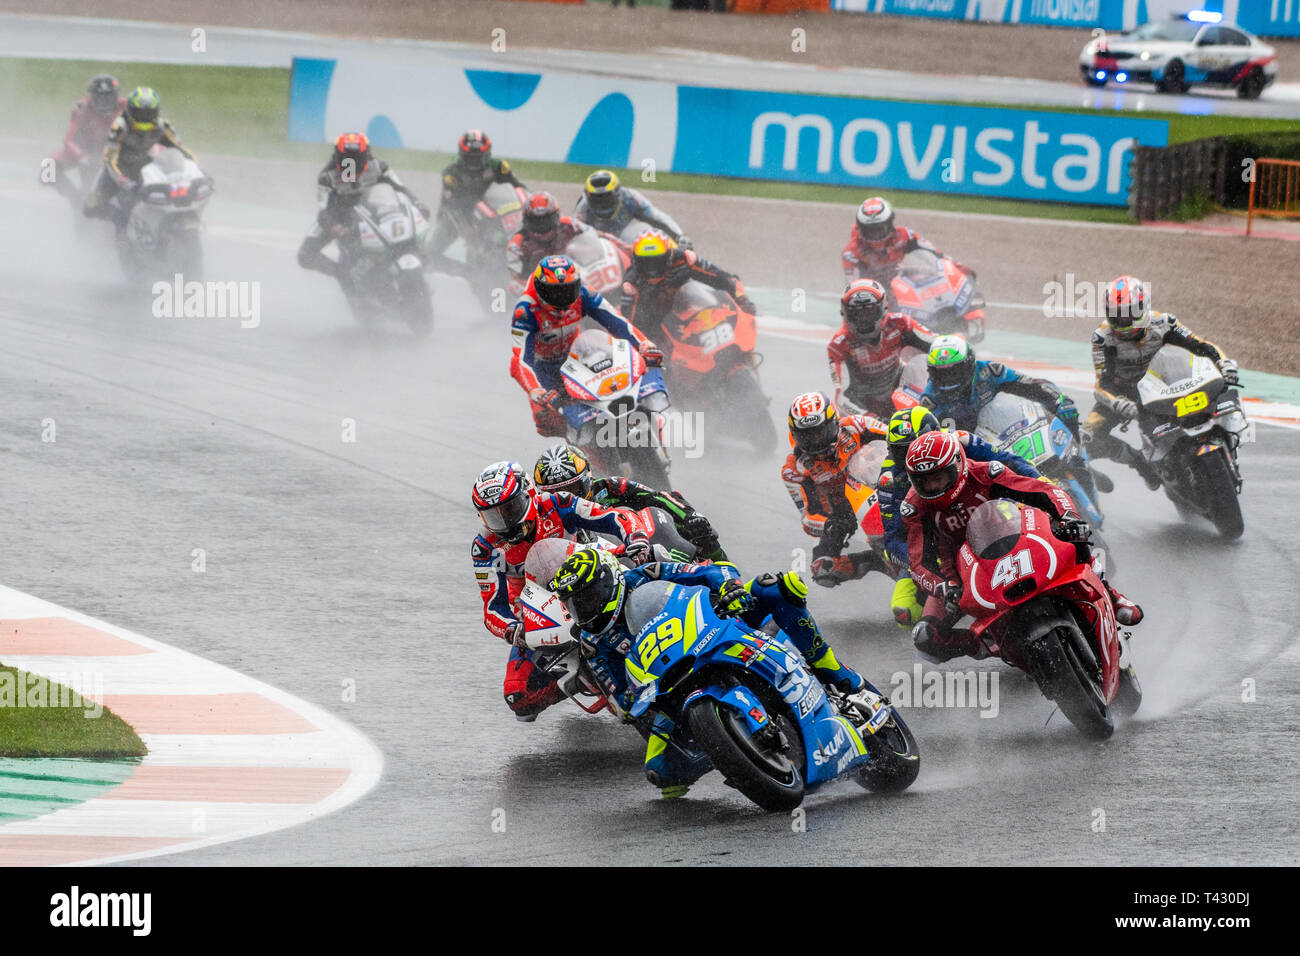 Valencia/Spain - 11/18/2018 - the riders going through turn 4 on the opening lap of the Valencia GP Stock Photo